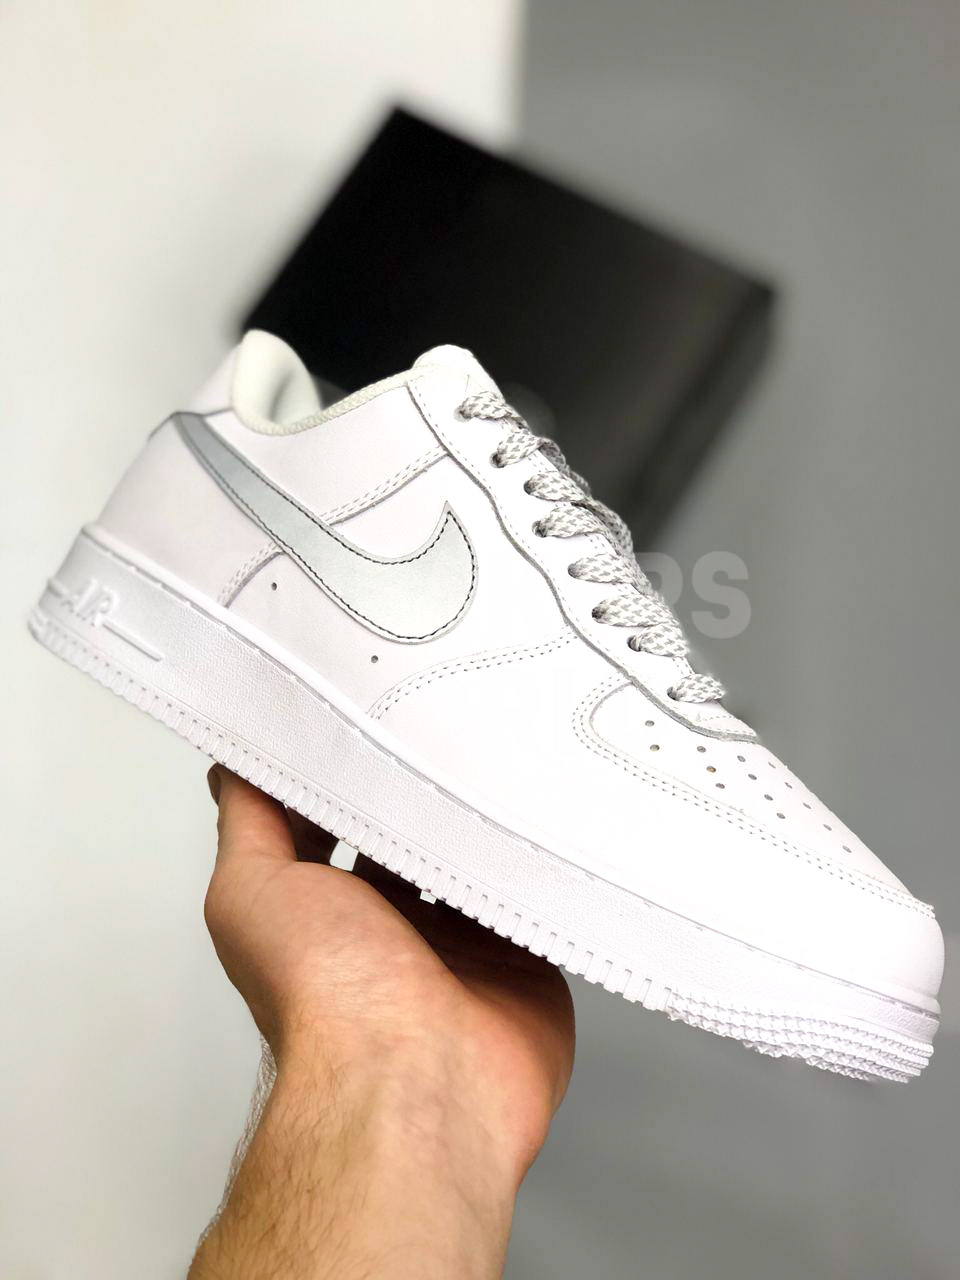 reflective airforce 1